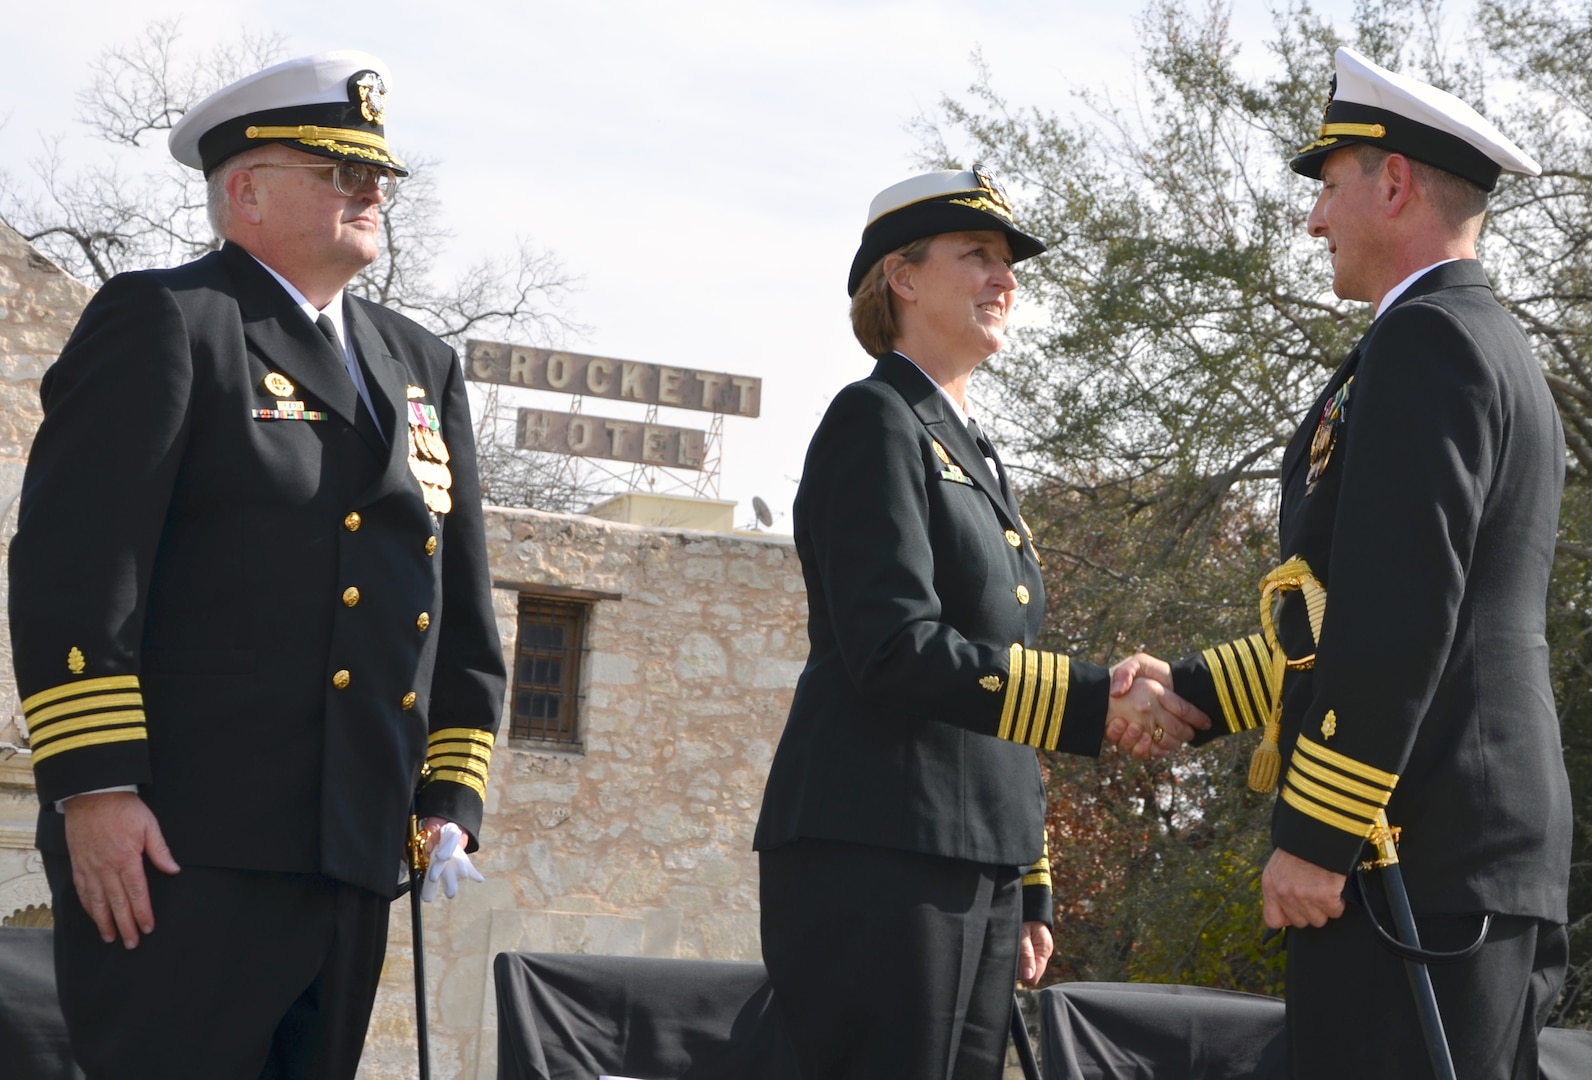 Navy Capt. Gail L. Hathaway, commander, Navy Medicine Education and Training Command, congratulates Capt. Joel A. Roos (right), new commander of Navy Medicine Training Support Center during a change of command ceremony Jan. 11 at the Alamo. Capt. John D. Larnerd (left) relinquished command to Roos.
Photo by Lori Newman